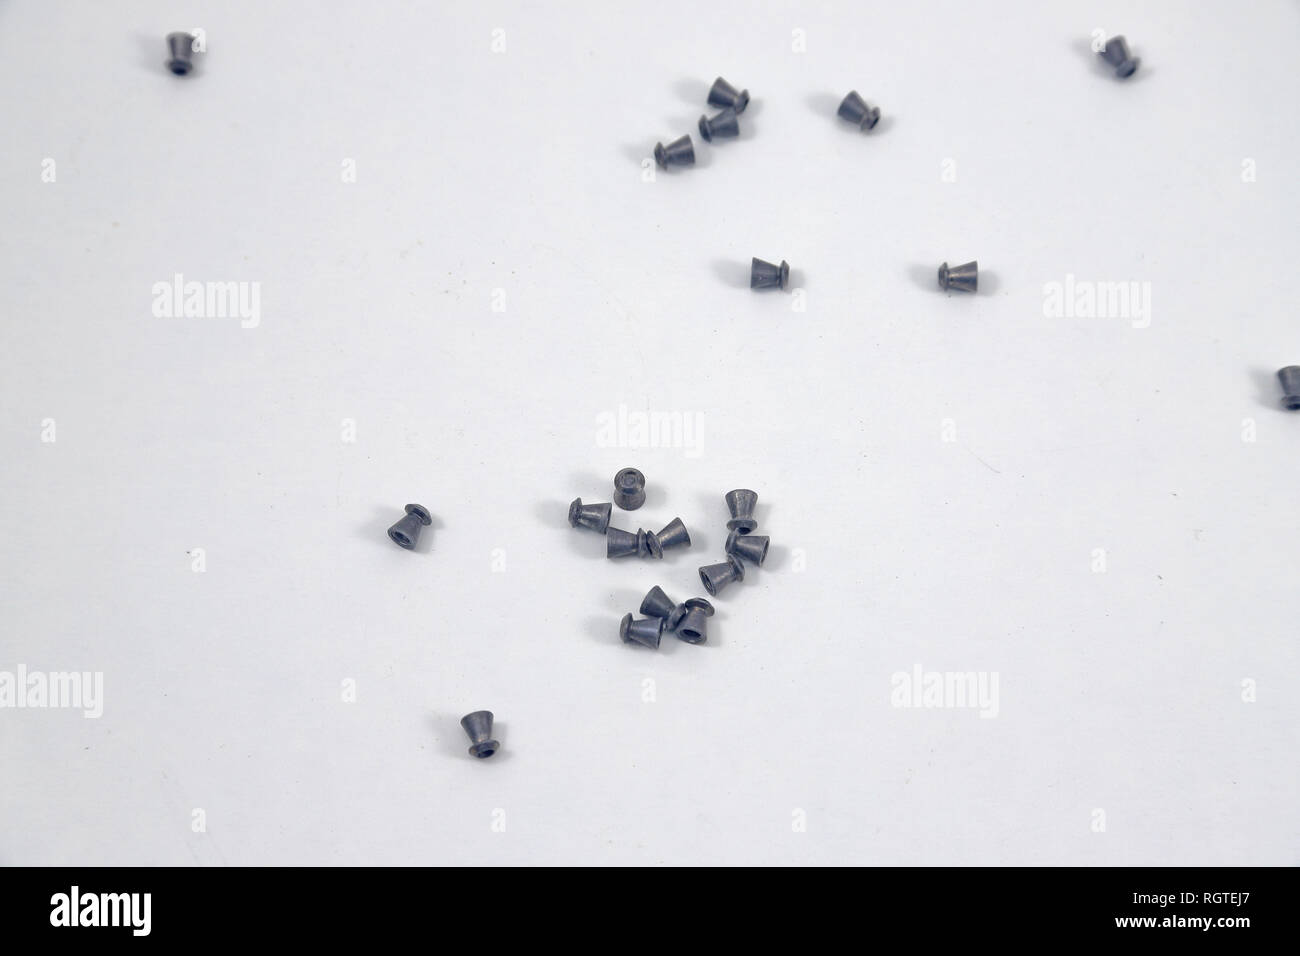 Air Rifle pellets used for hunting and sport, scattered on a white background Stock Photo